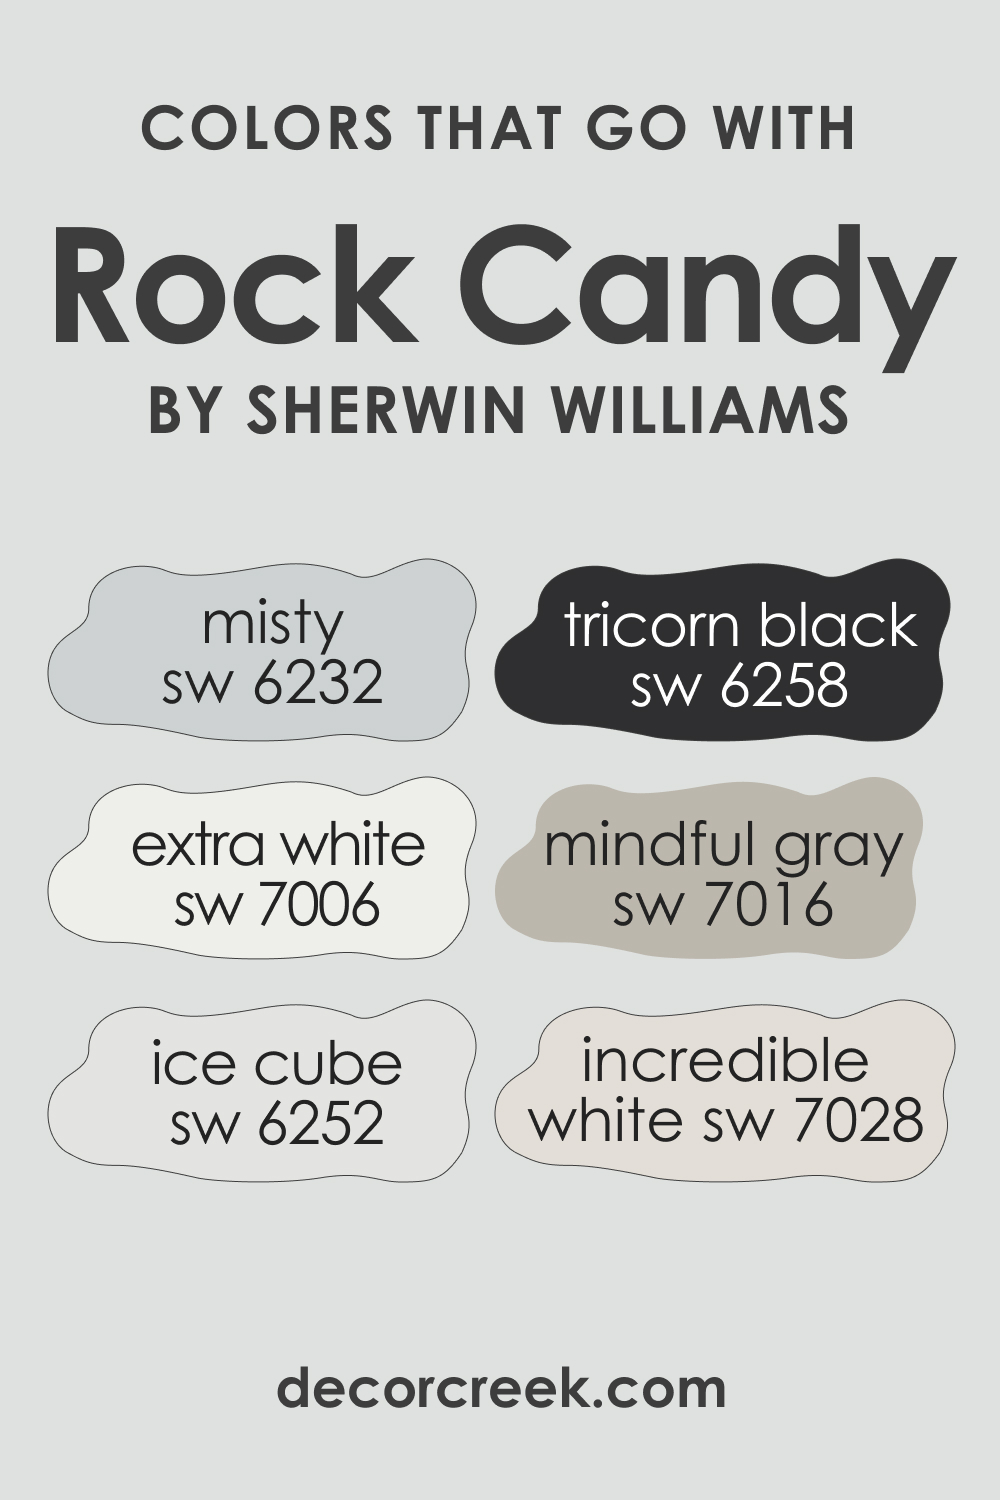 Colors That Go With SW 6231 Rock Candy